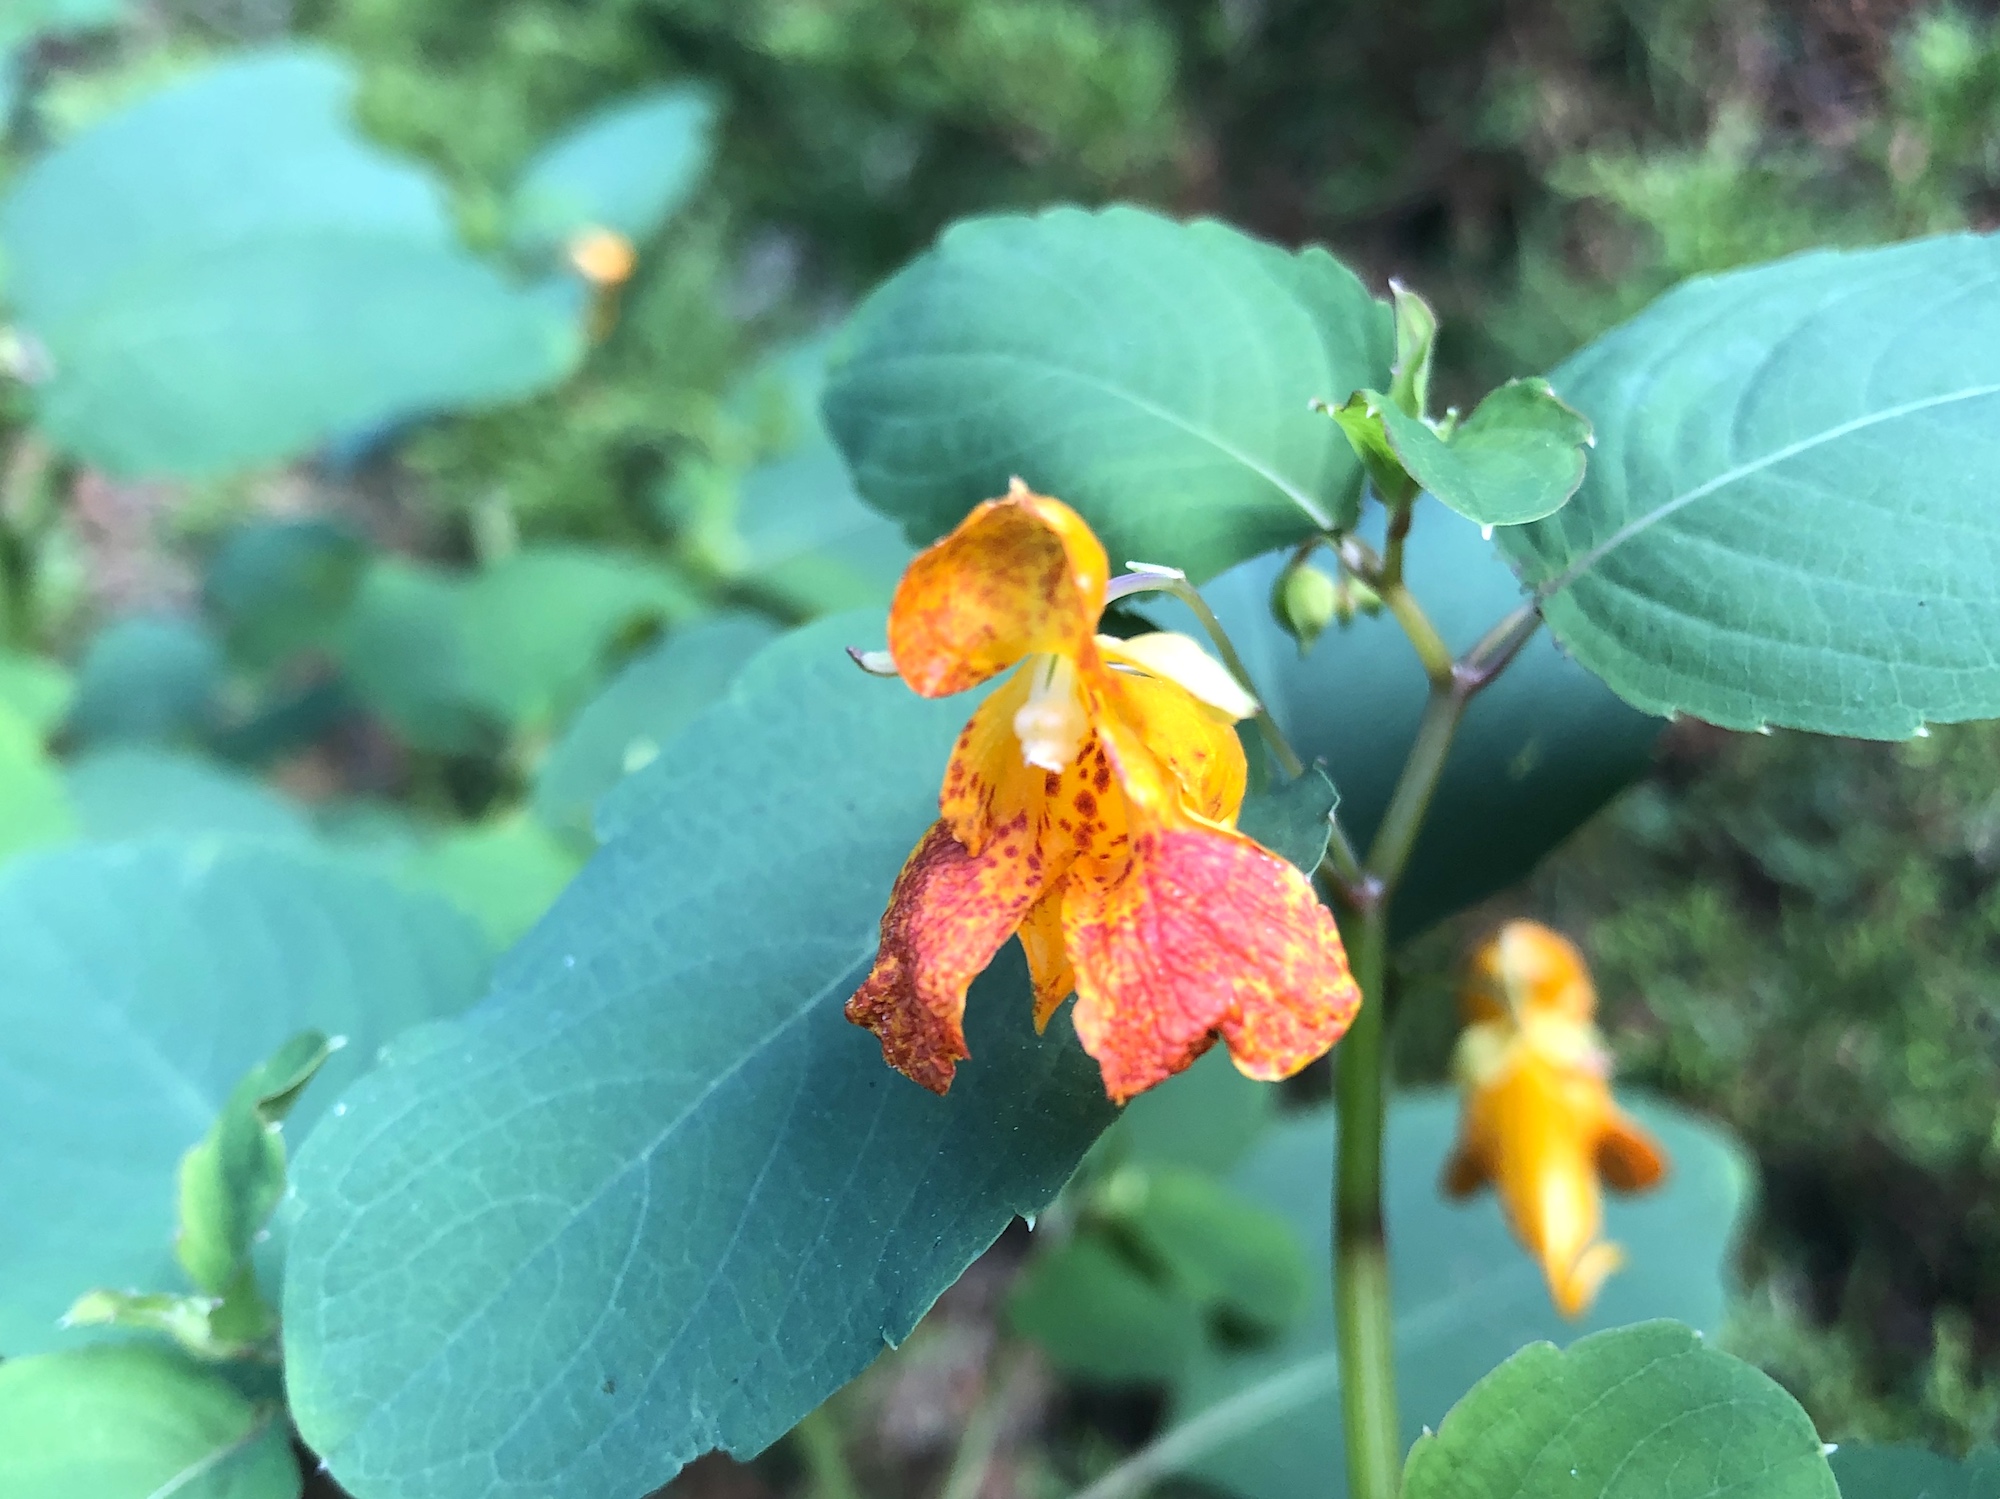 Spotted Jewelweed in Nakoma Park on August 3, 2019.